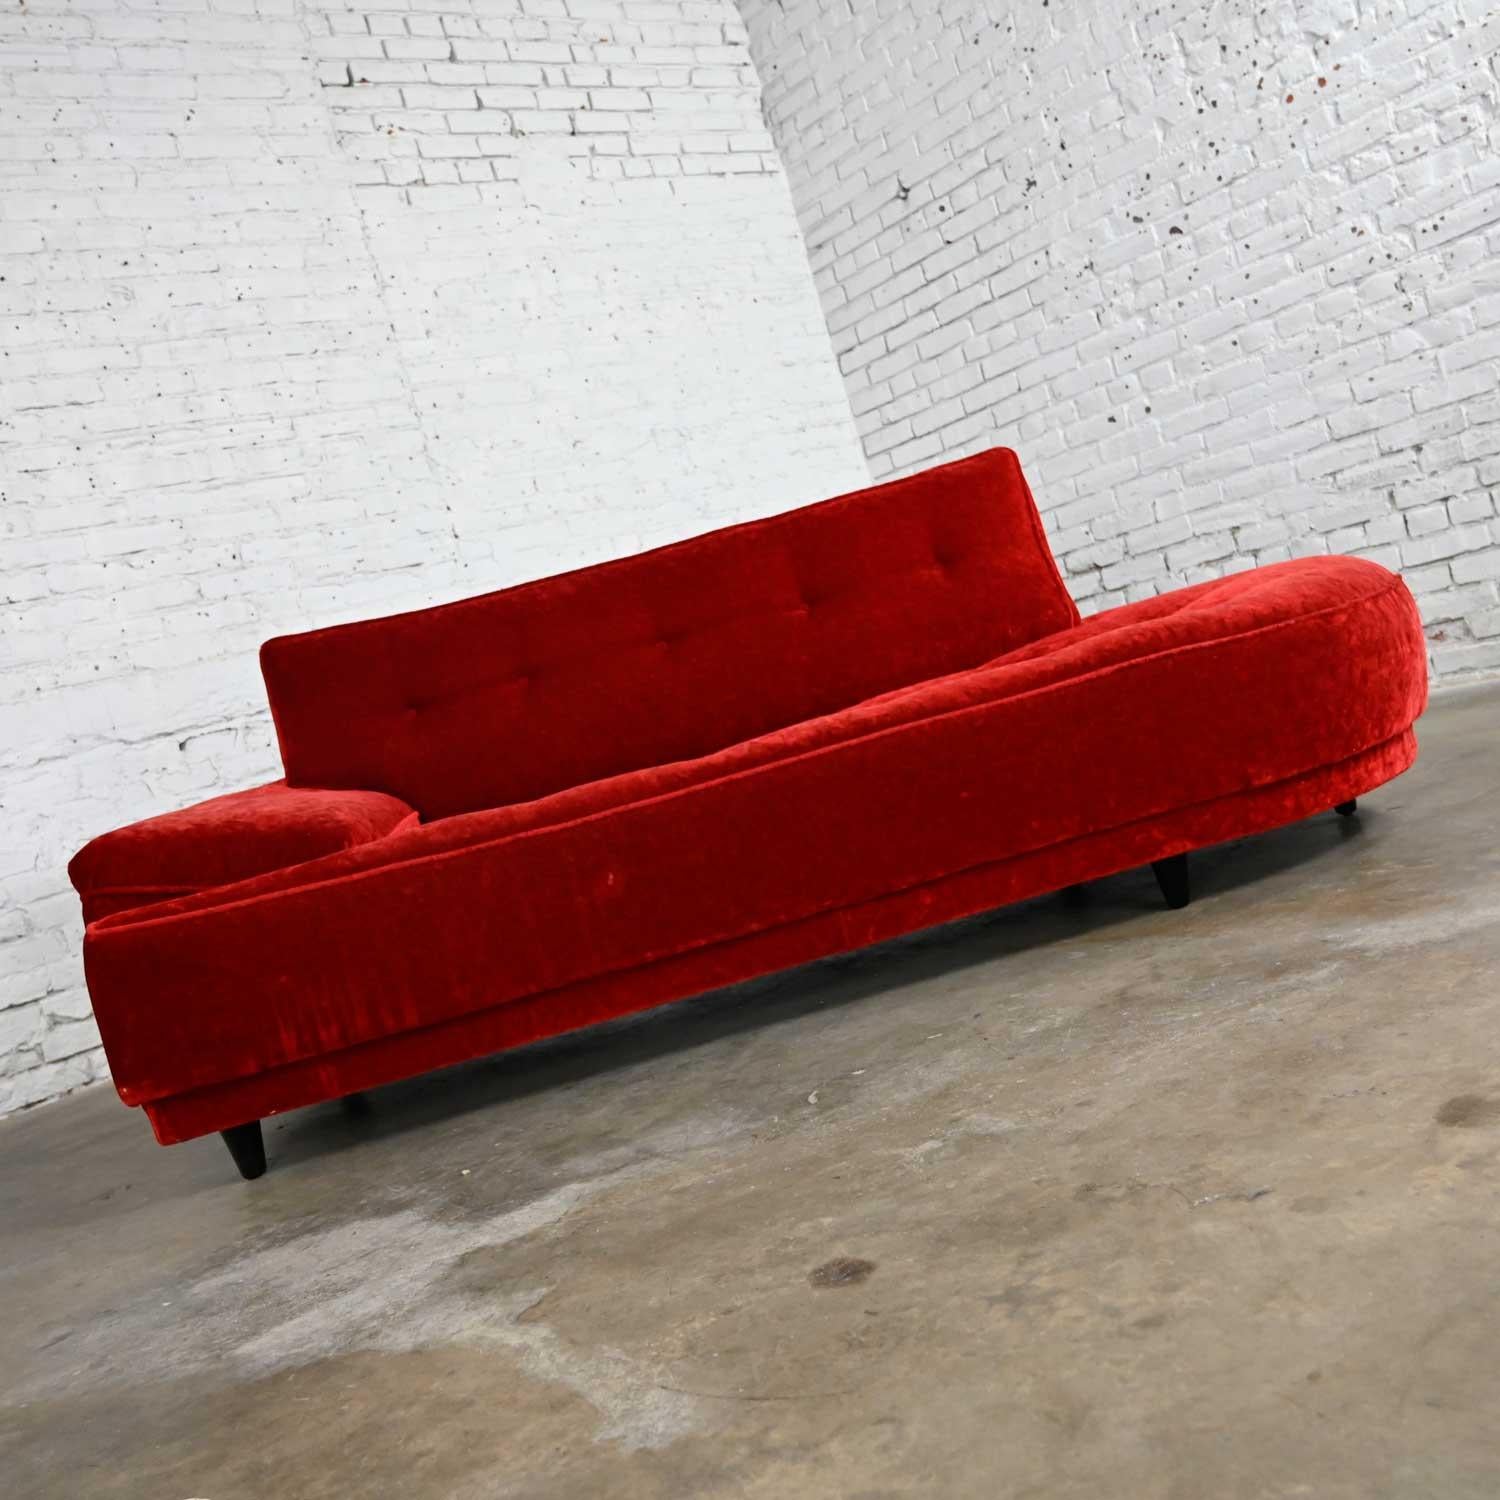 Gorgeous Mid Century 1950’s Hollywood Regency or Art Deco style crushed red velvet chaise lounge with wood legs. Beautiful condition, keeping in mind that this is vintage and not new so will have signs of use and wear. Legs have been newly painted